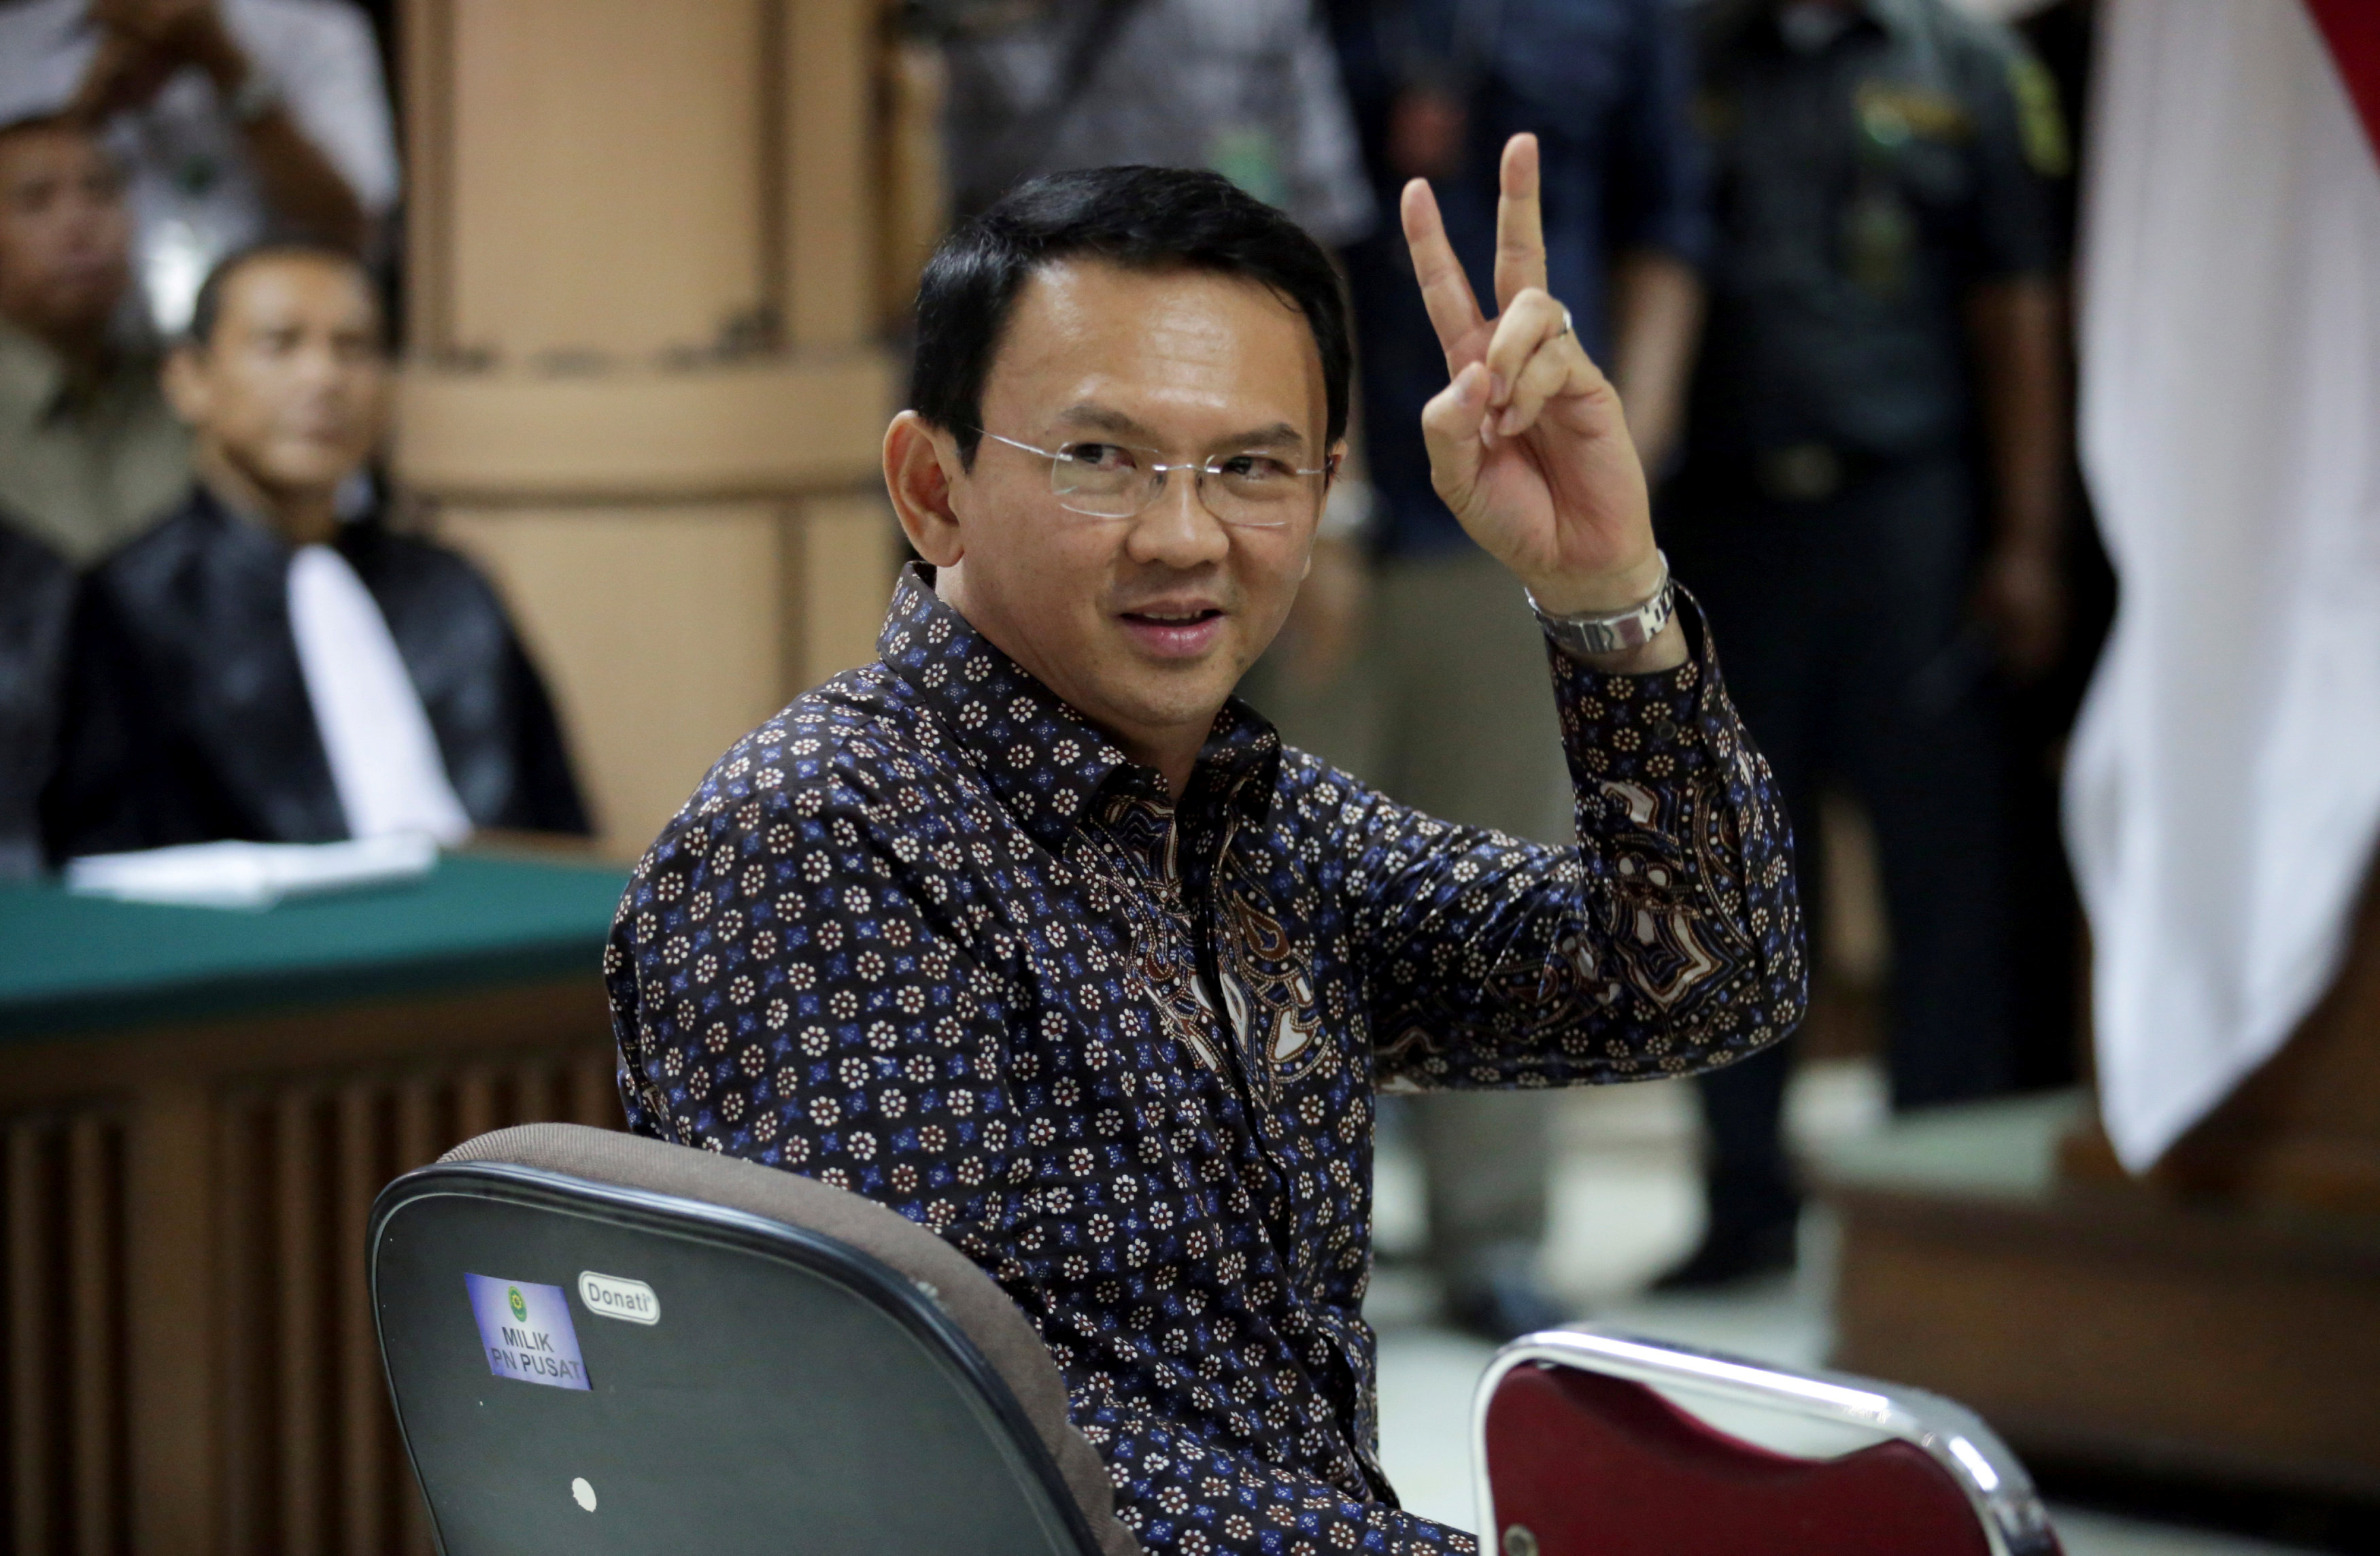 Jakarta's Governor Basuki Tjahaja Purnama gestures inside the courtroom during his blasphemy trial at the North Jakarta District Court in Jakarta, Indonesia, December 27, 2016. REUTERS/Bagus Indahono/Pool TPX IMAGES OF THE DAYn